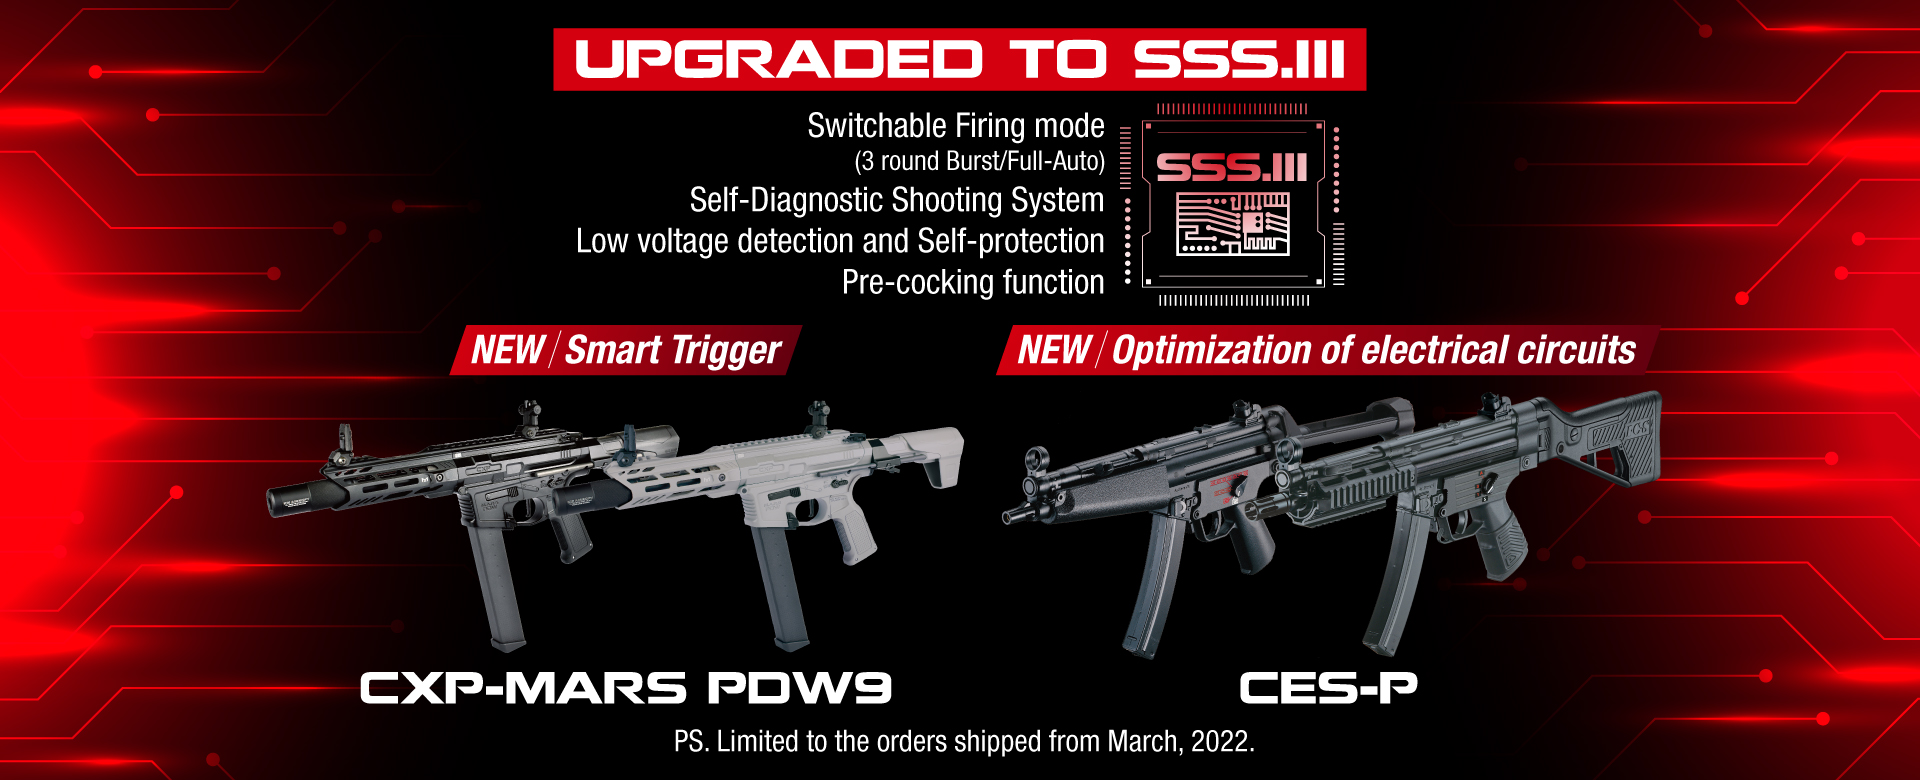 PDW9 & CES-P SSS Upgrade